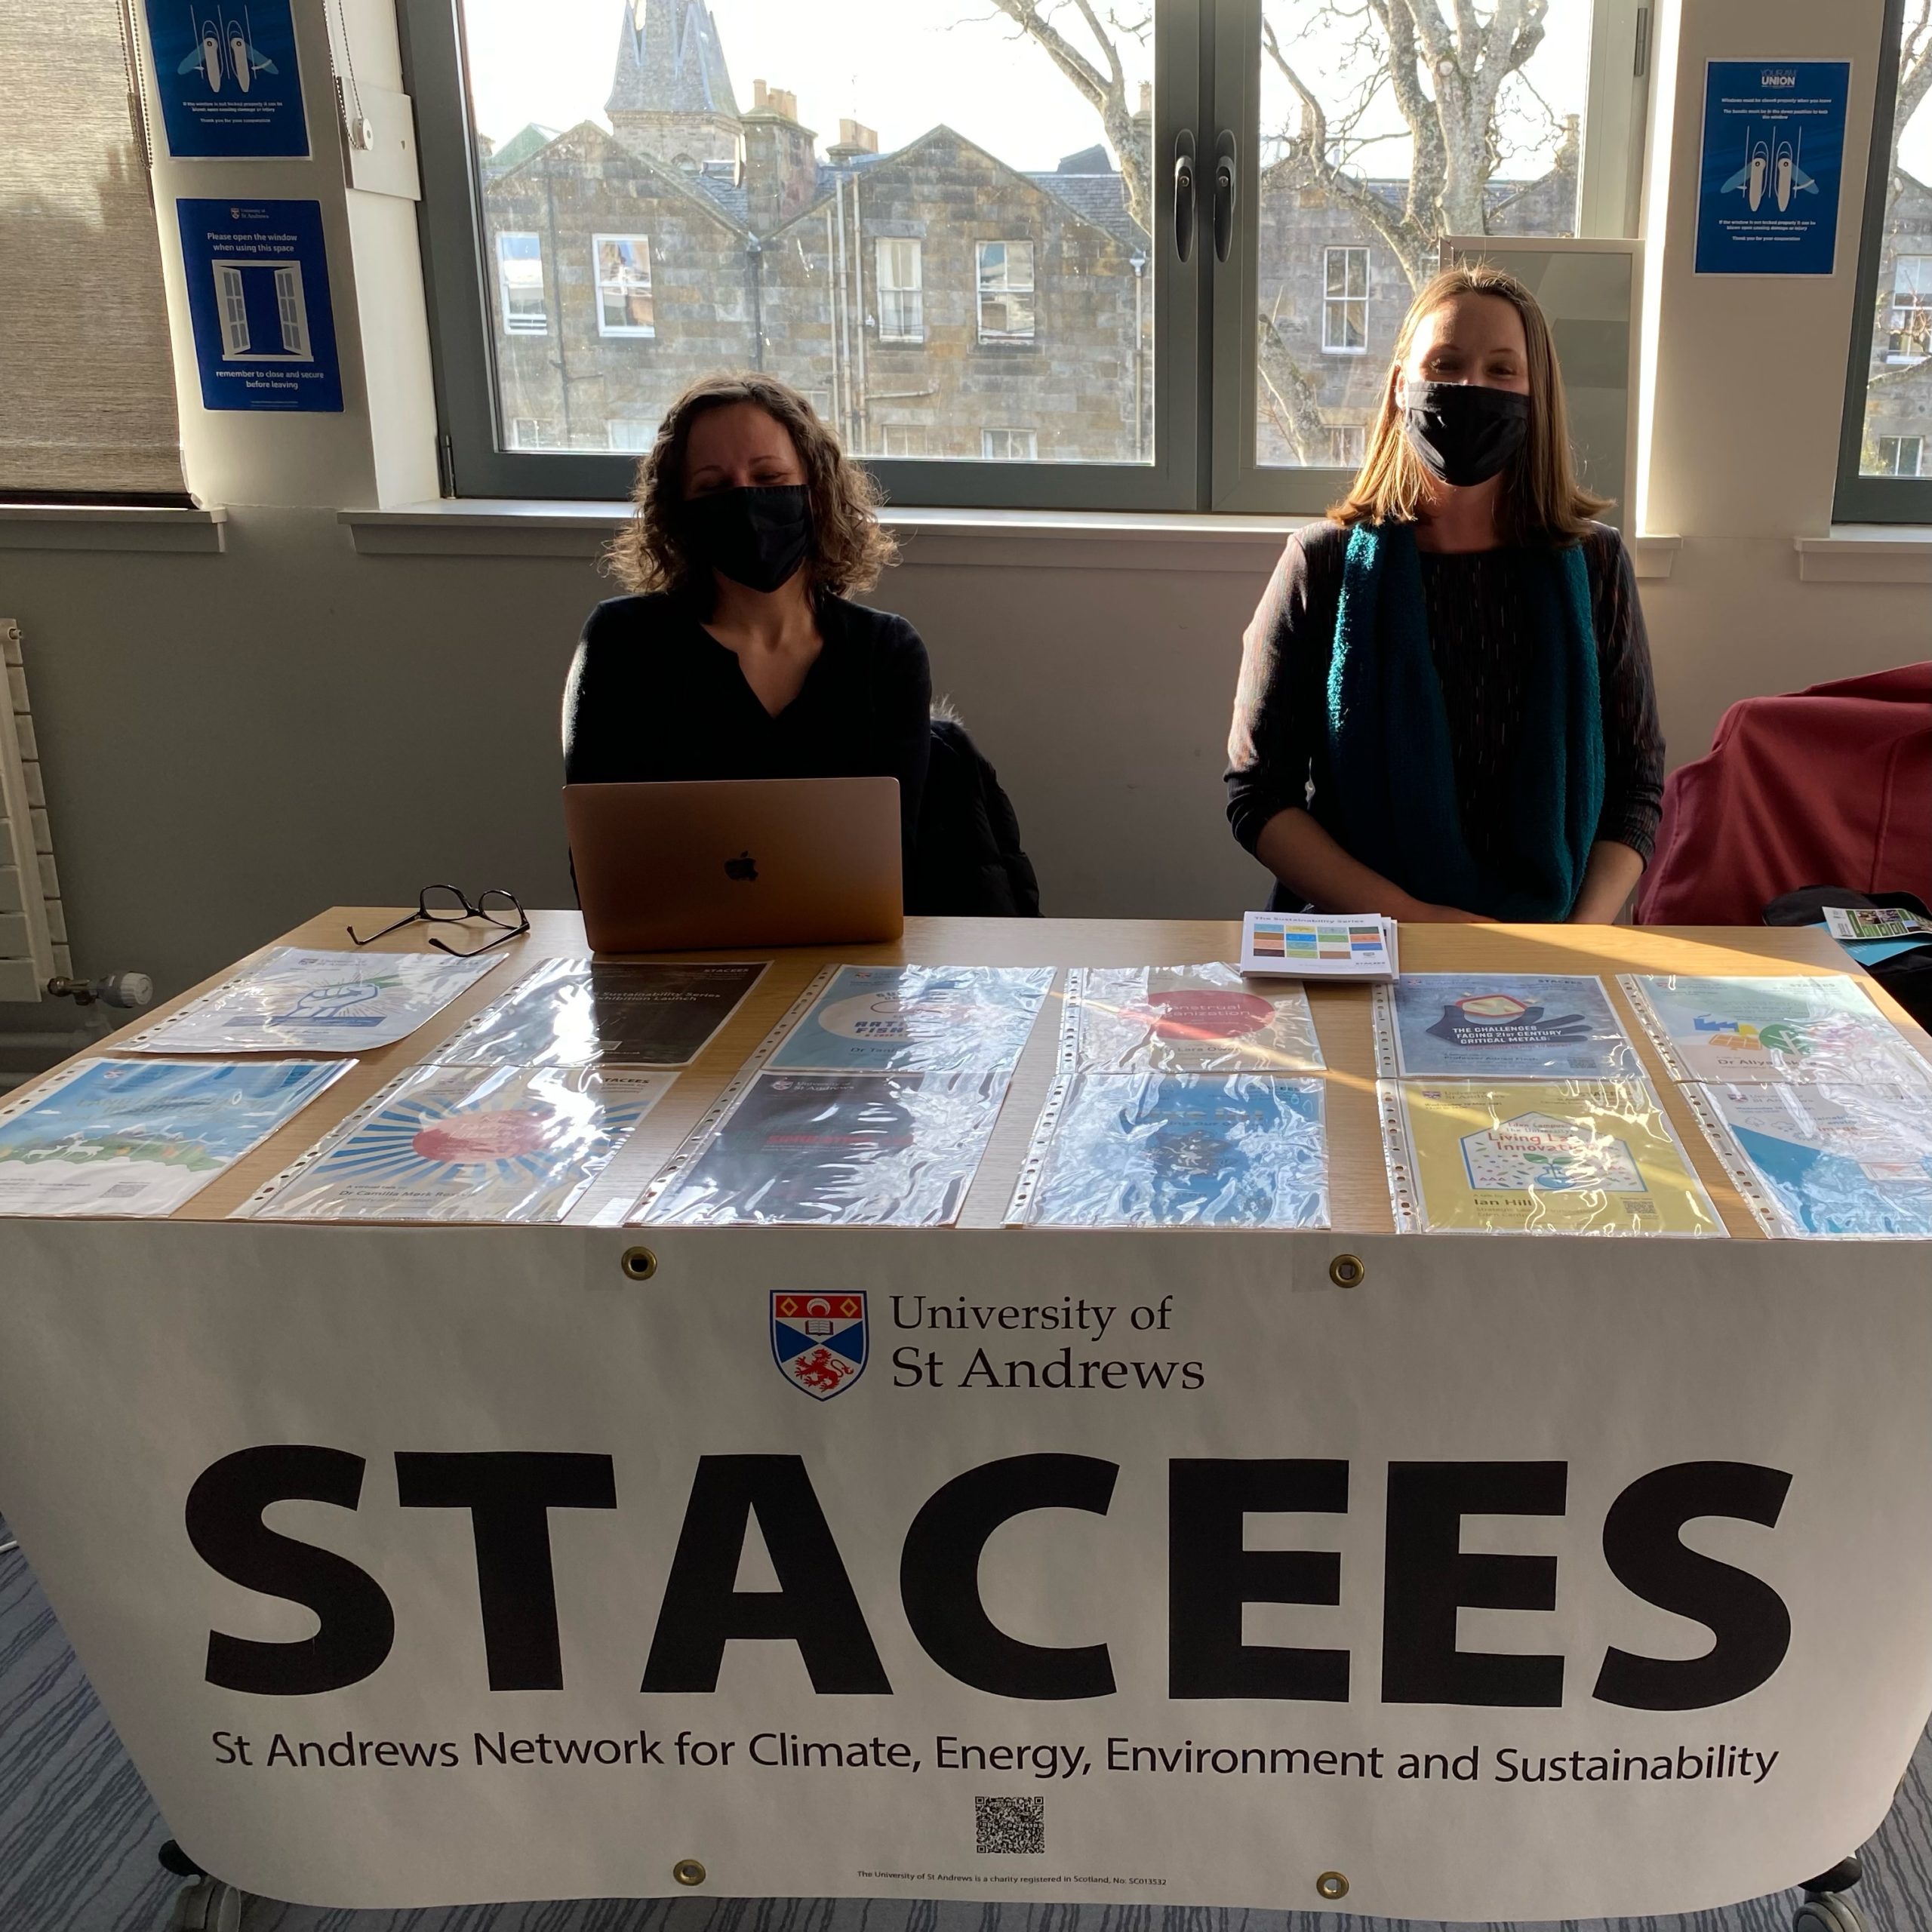 STACEES @ Sustainability Fayre